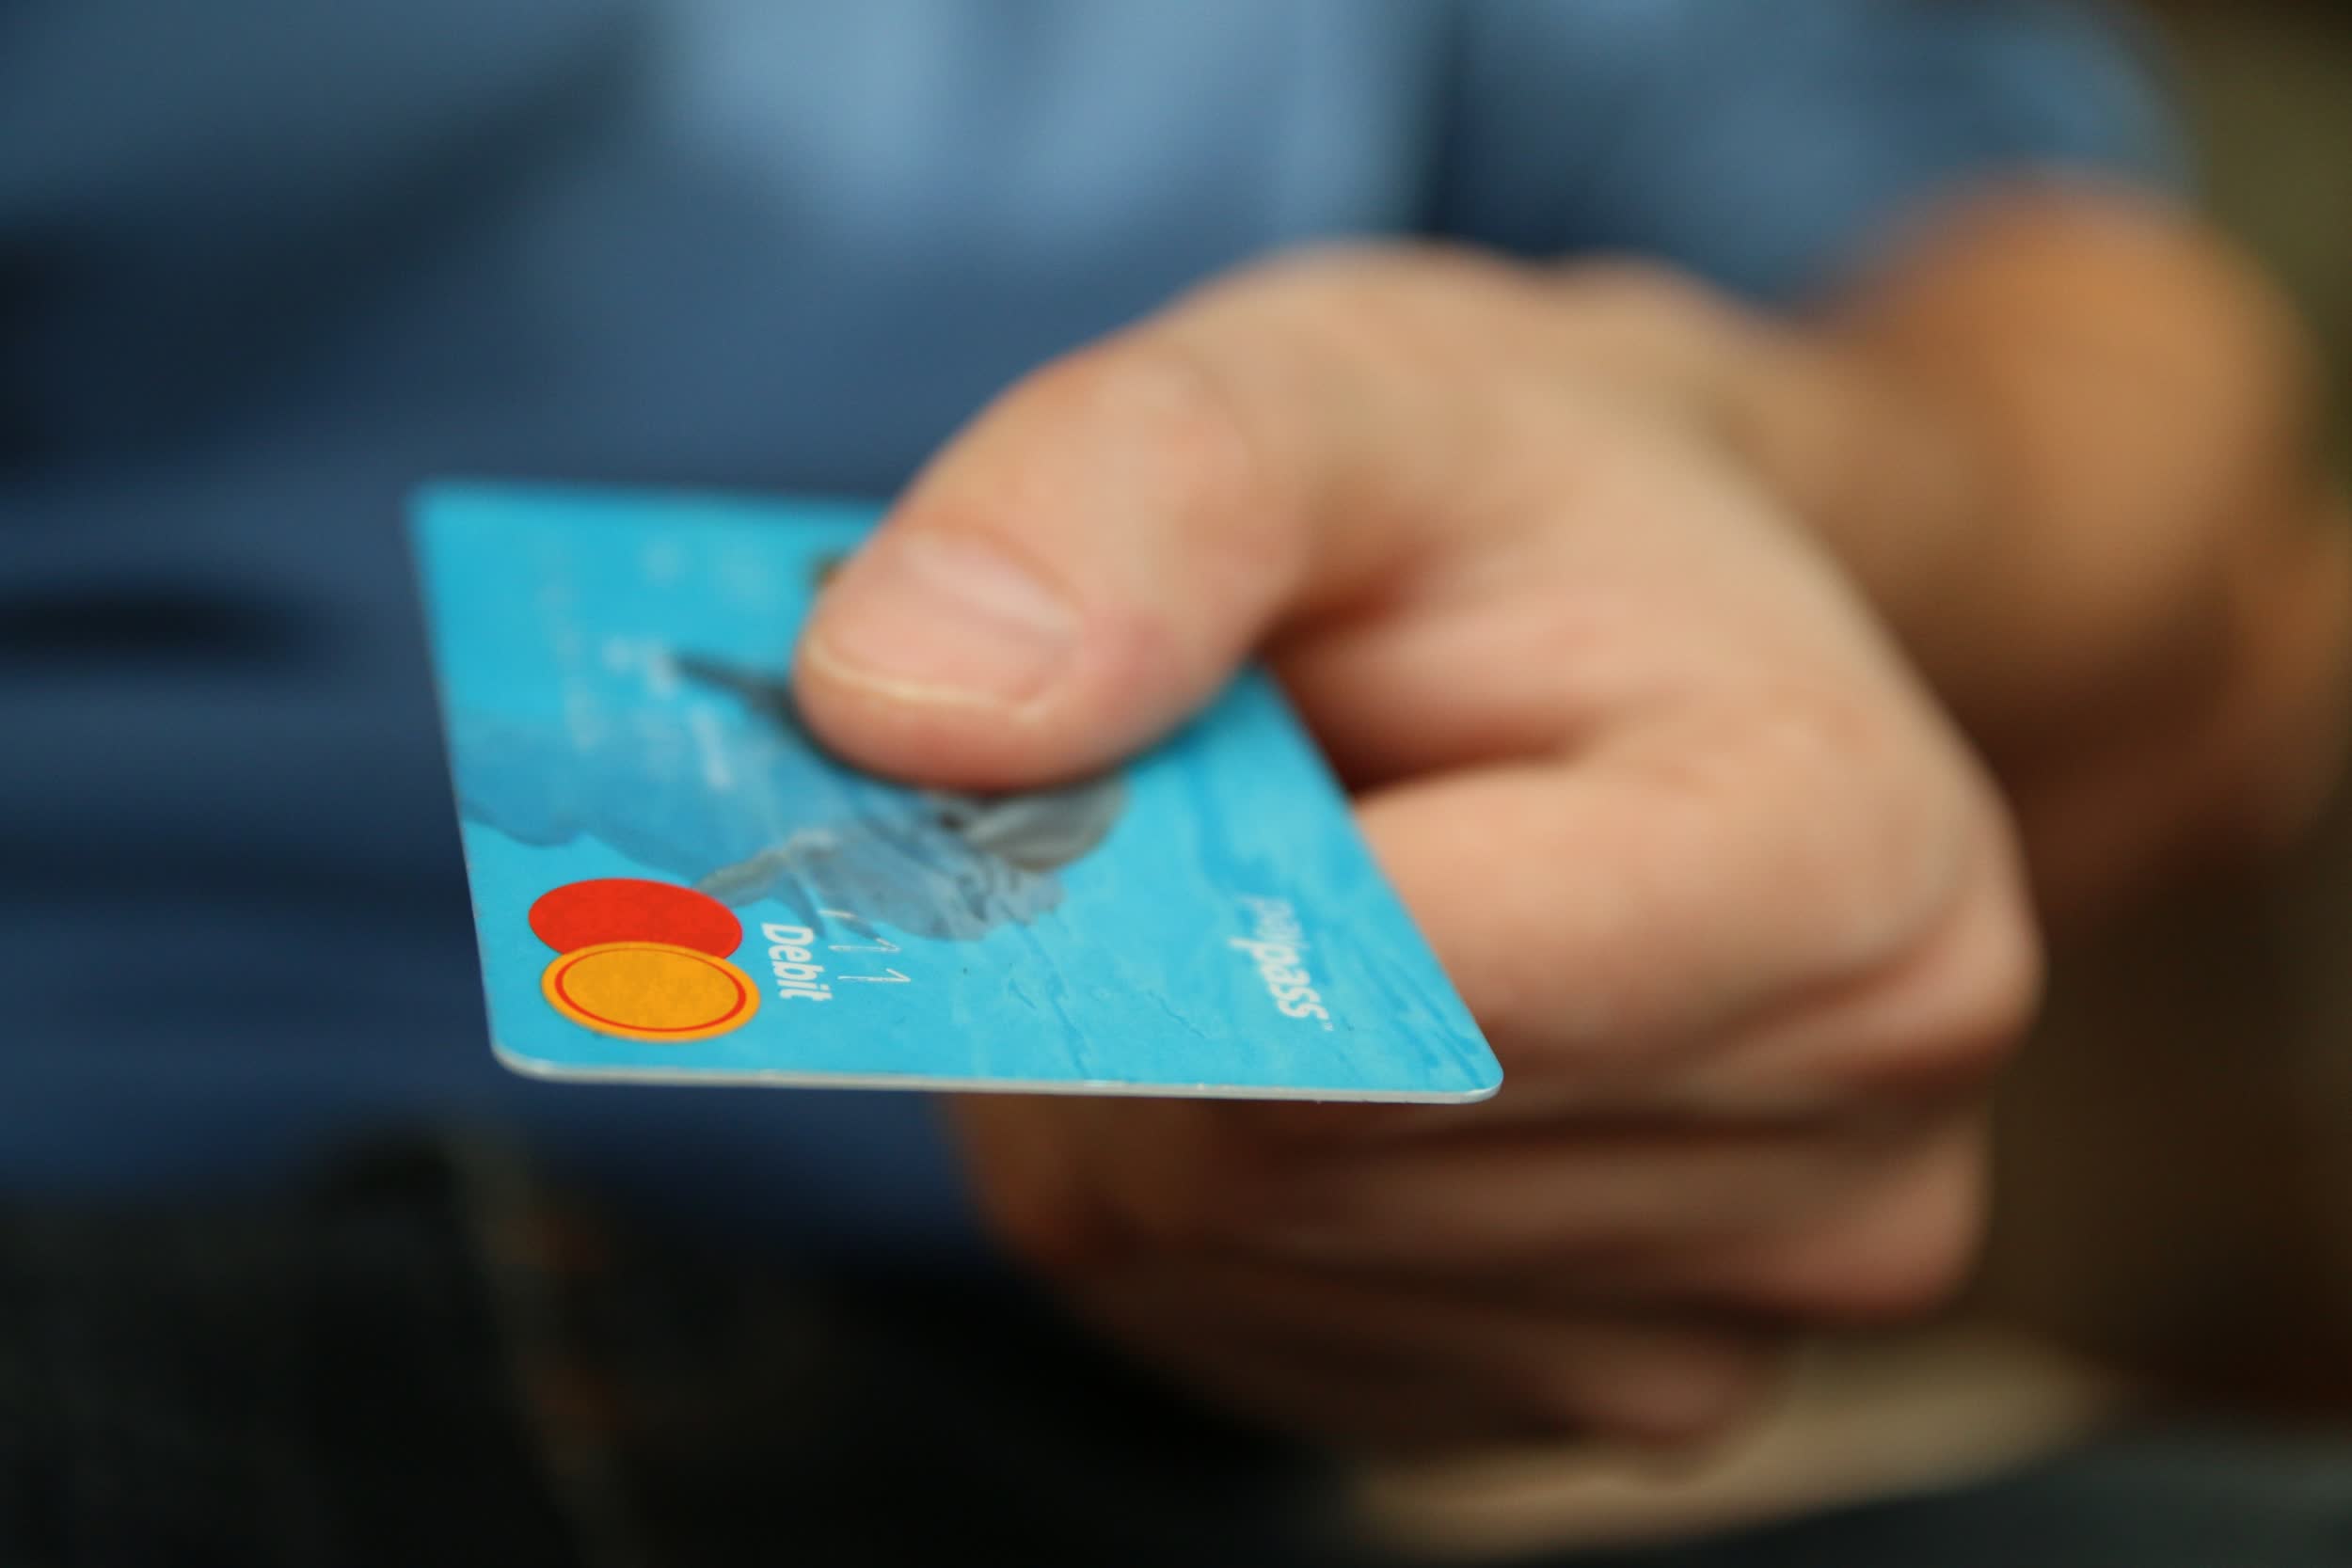 Hackers are brute-force guessing payment card numbers, and there's nothing you can do about it